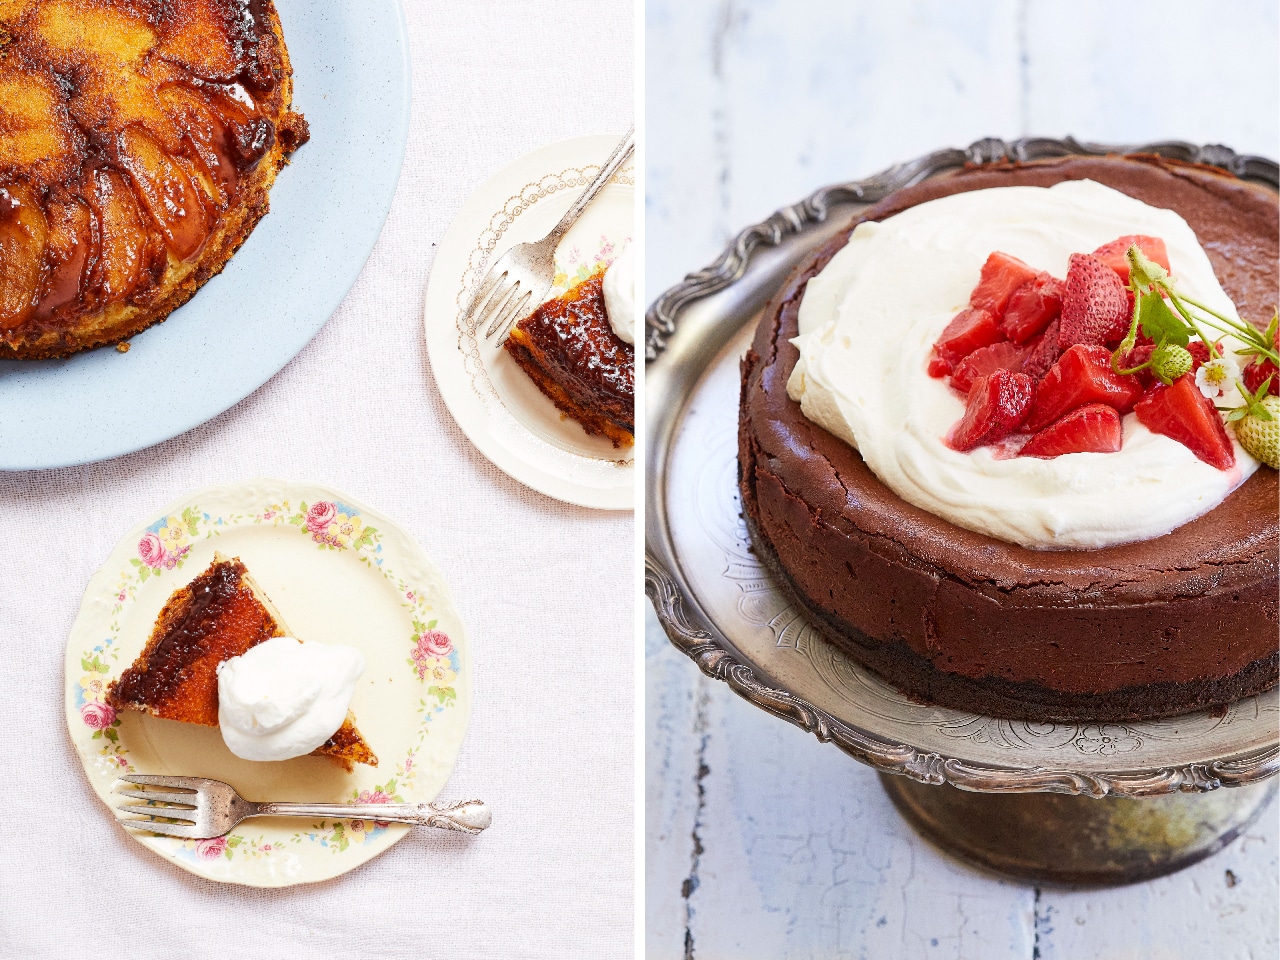 A side-by-side photos of Gemma Stafford's Fall Apple Cinnamon Upside-Down Cake and Chocolate Lover's Cheesecake with Strawberry Compote from her new cookbook, "Bigger Bolder Baking Every Day." 